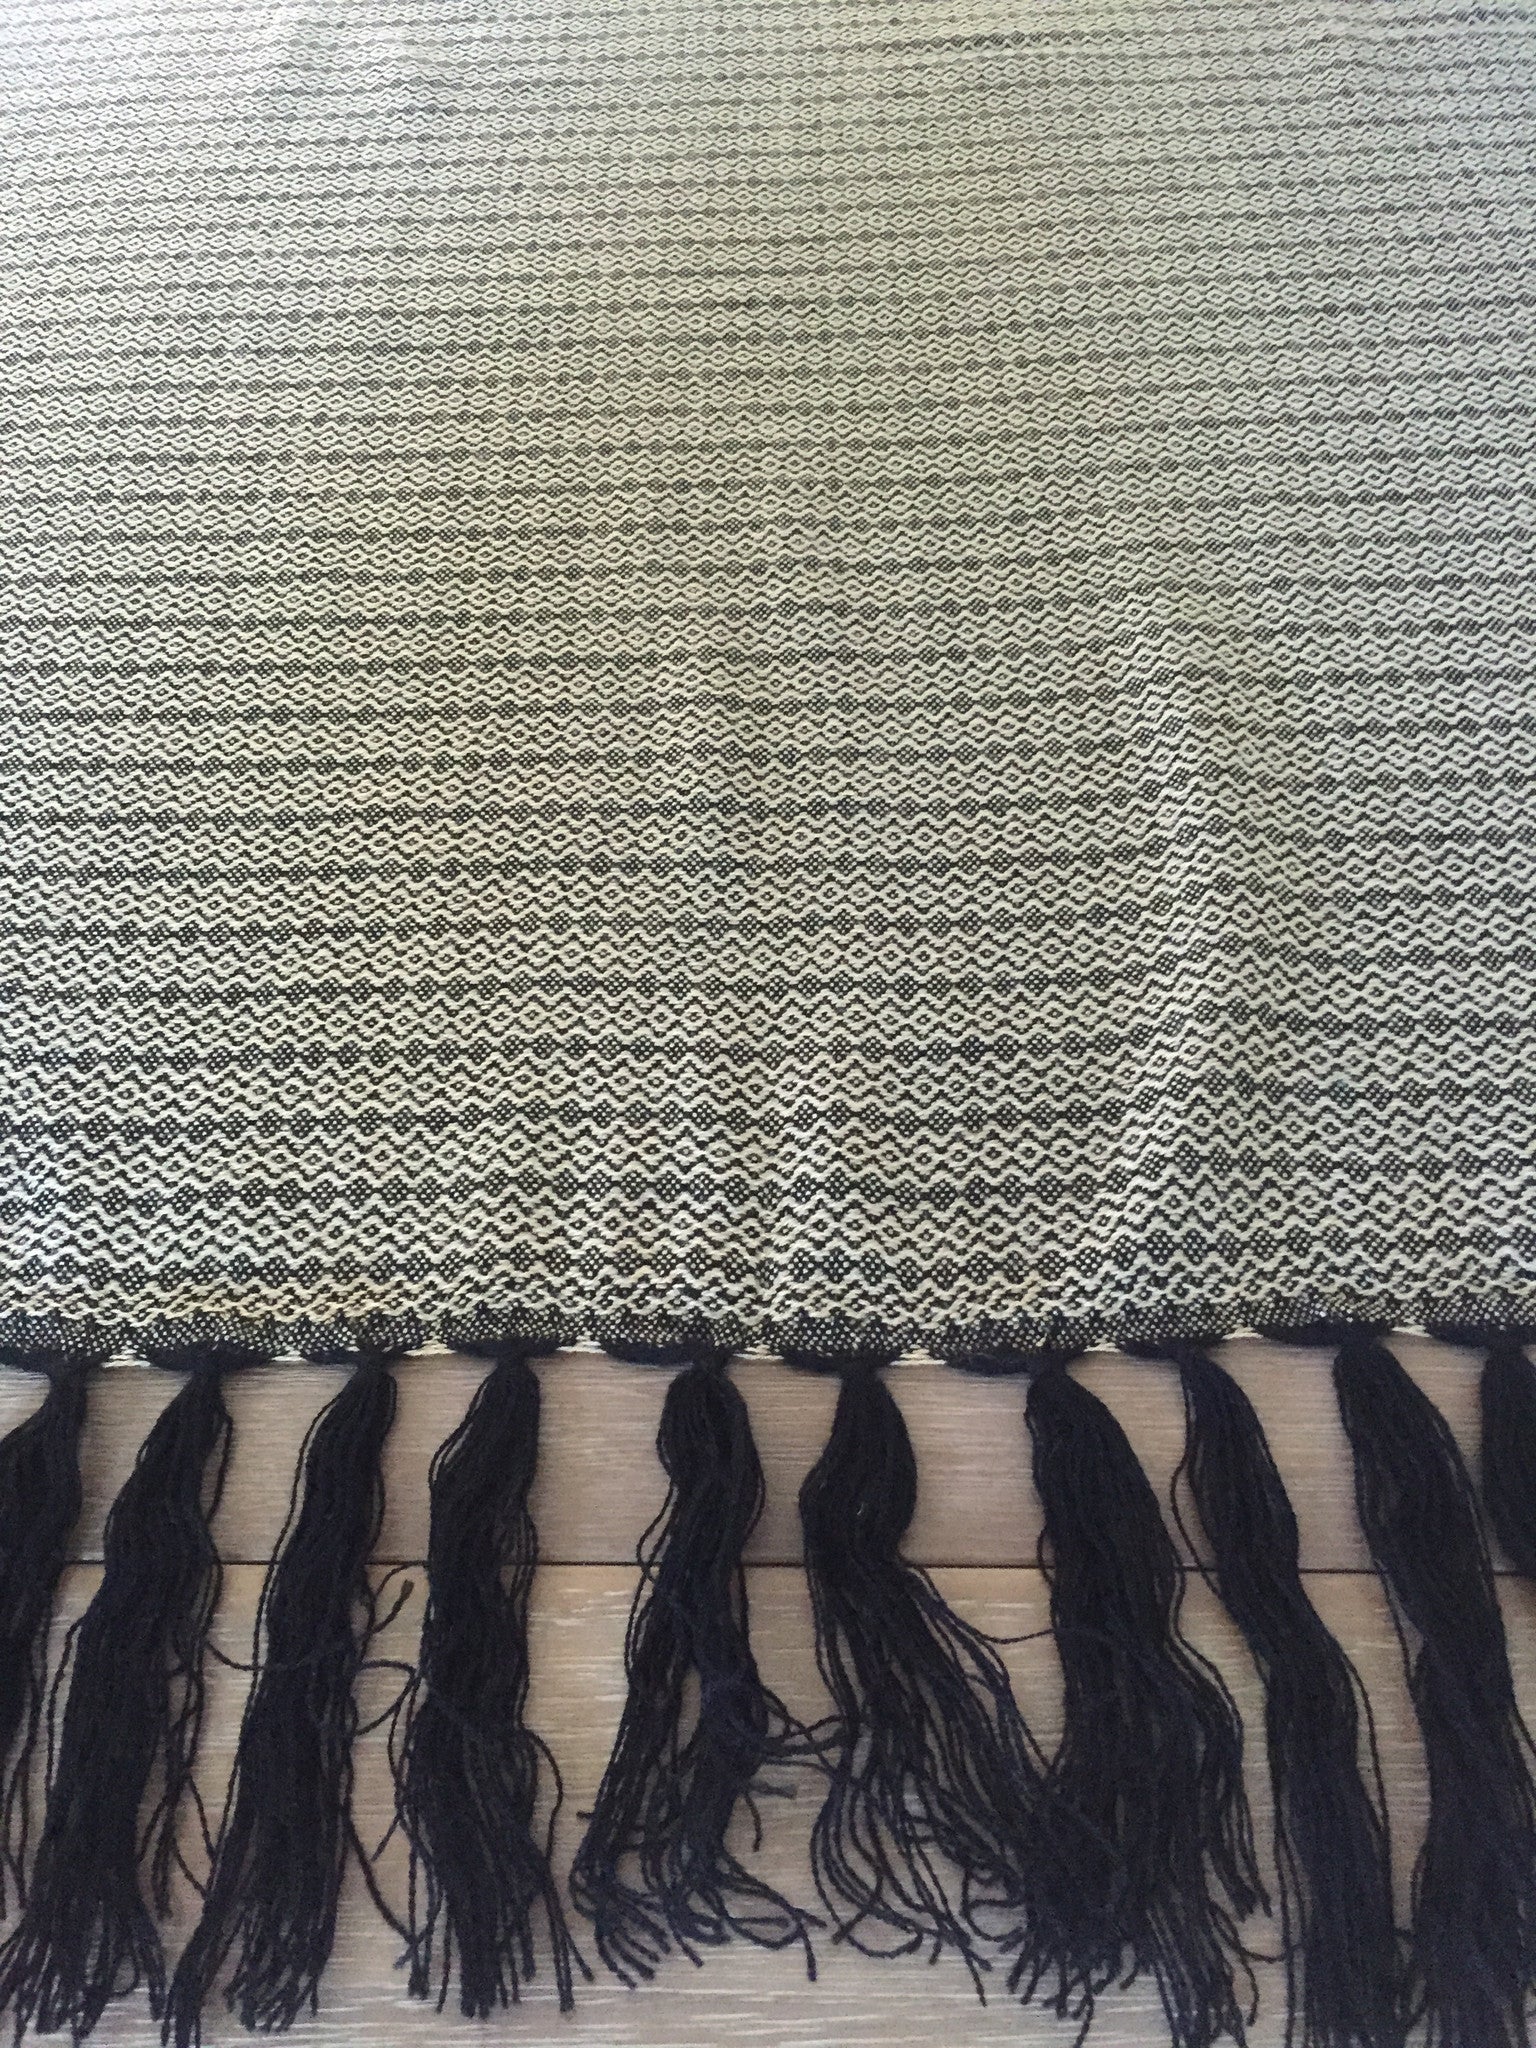 Mexican Rebozo Handwoven black and white with Fringes - MesaChic - 4